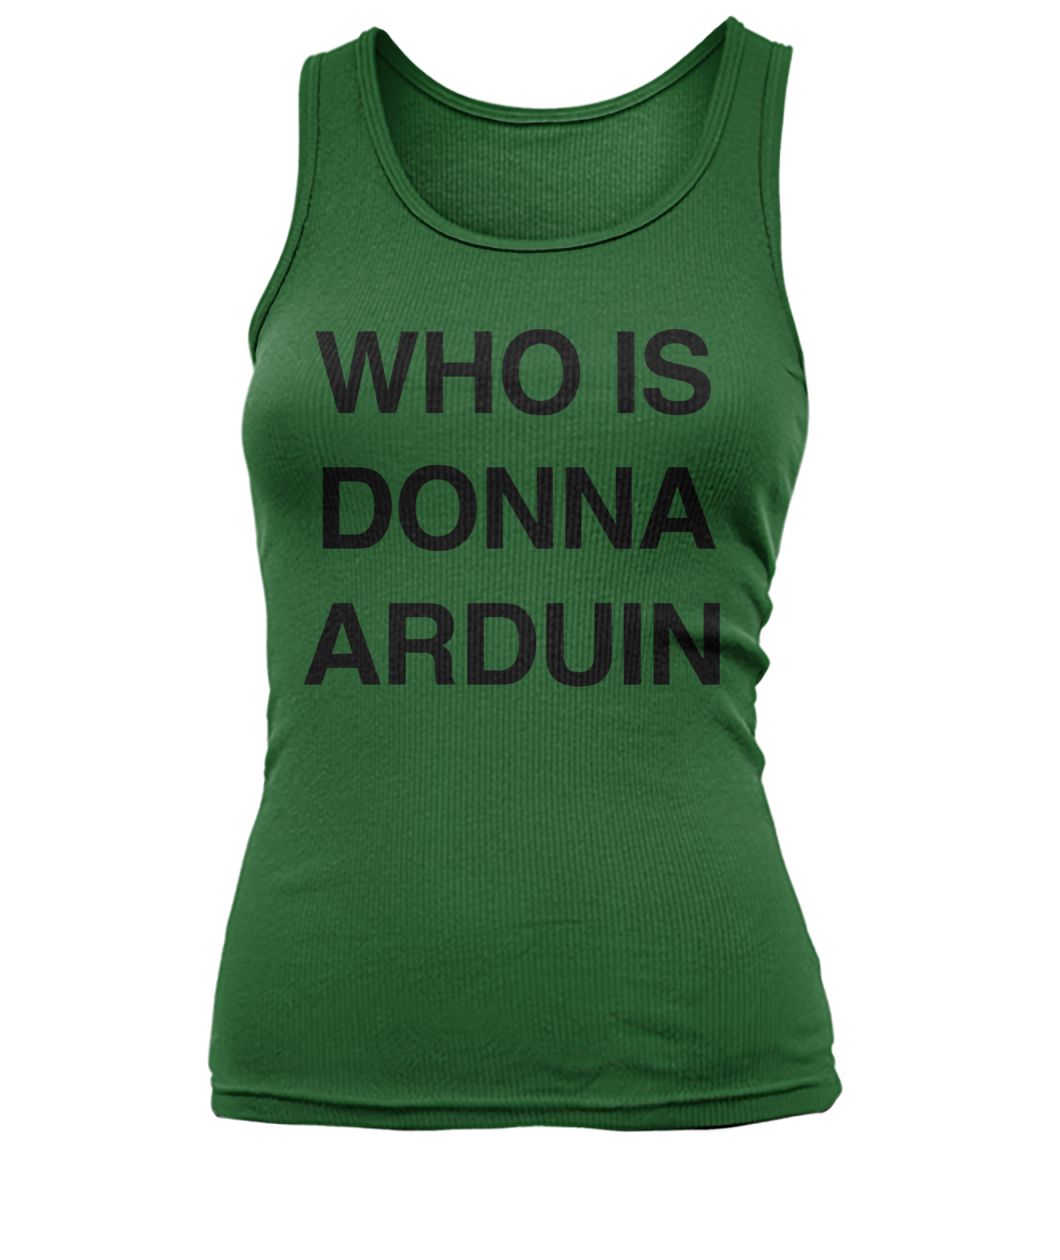 Who is donna arduin women's tank top